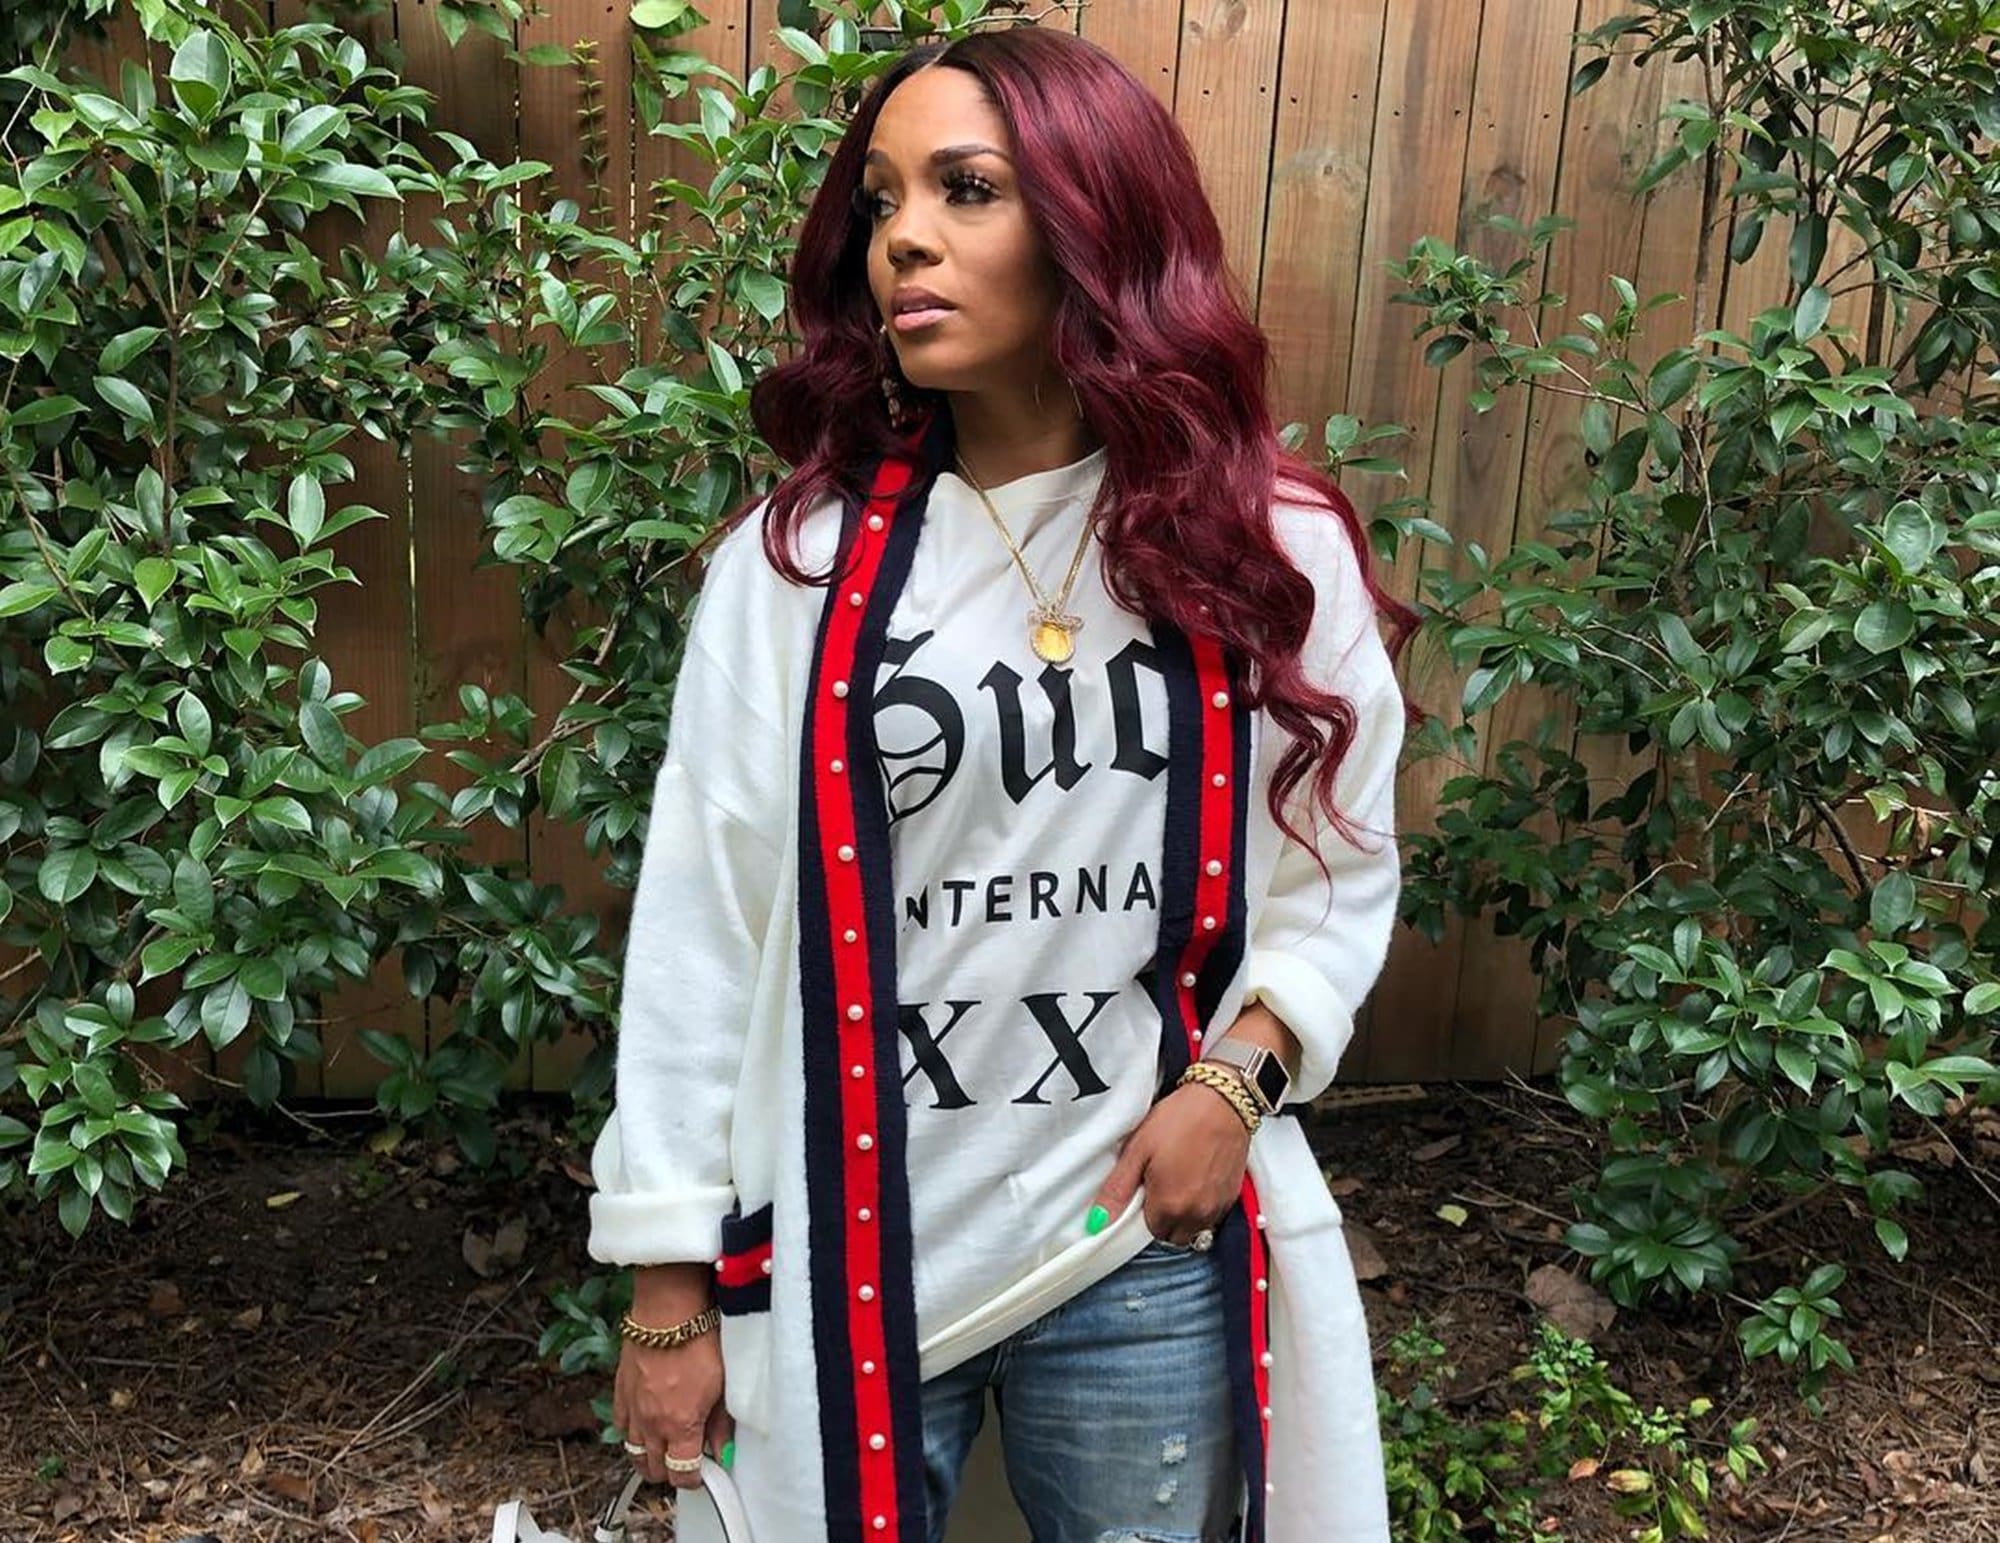 Rasheeda Frost Is Still Working These Days At Both Her Pressed Boutique And The Frost Bistro - Fans Criticize Her